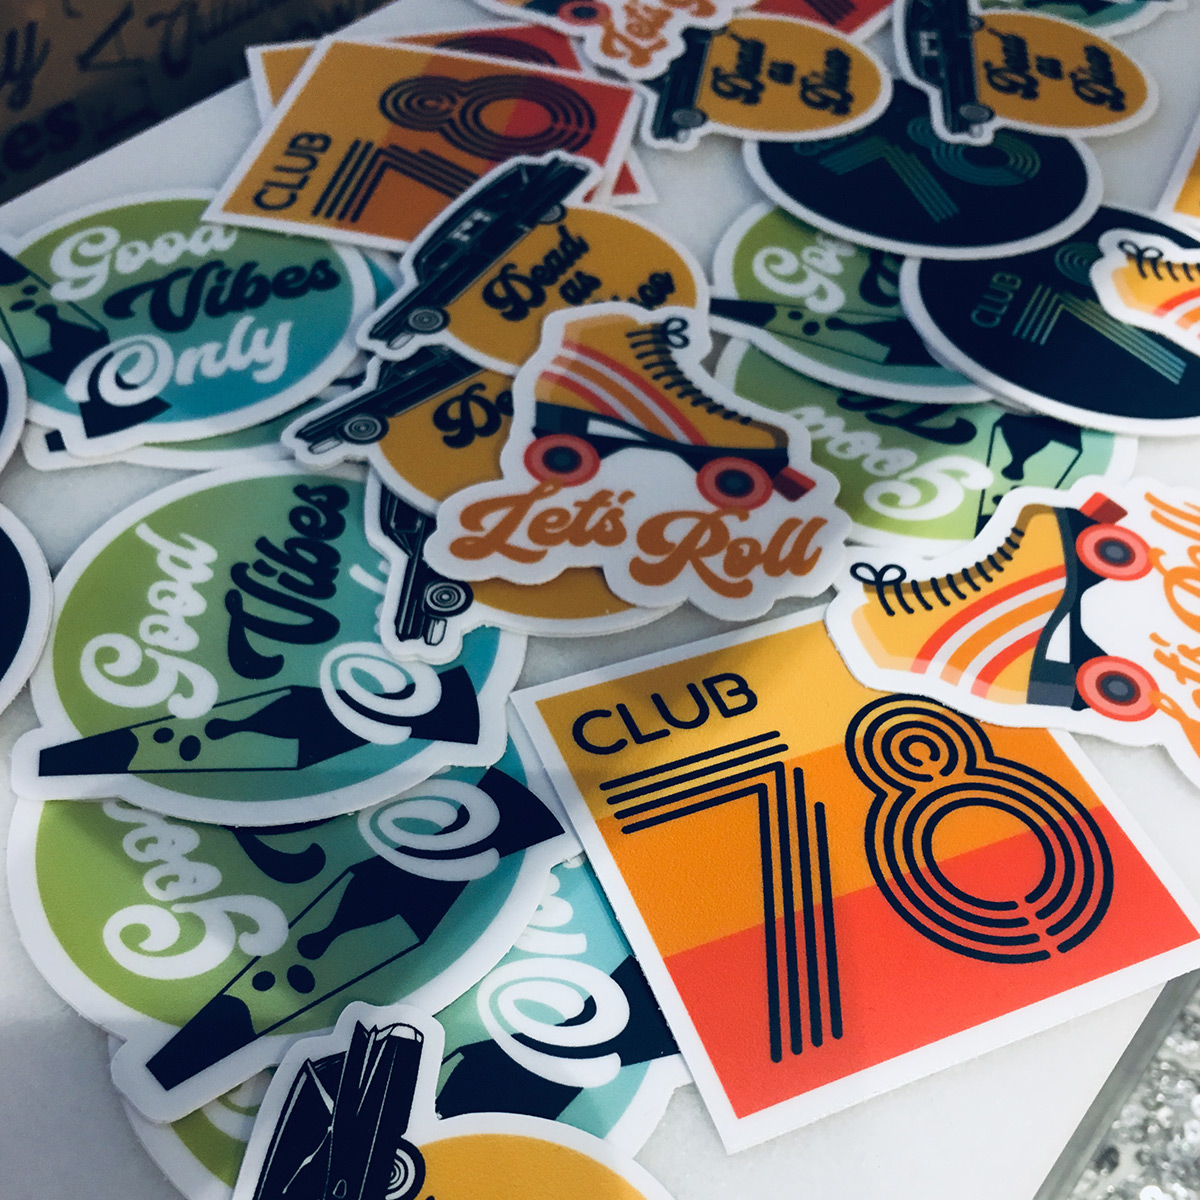 Club 78 themed stickers